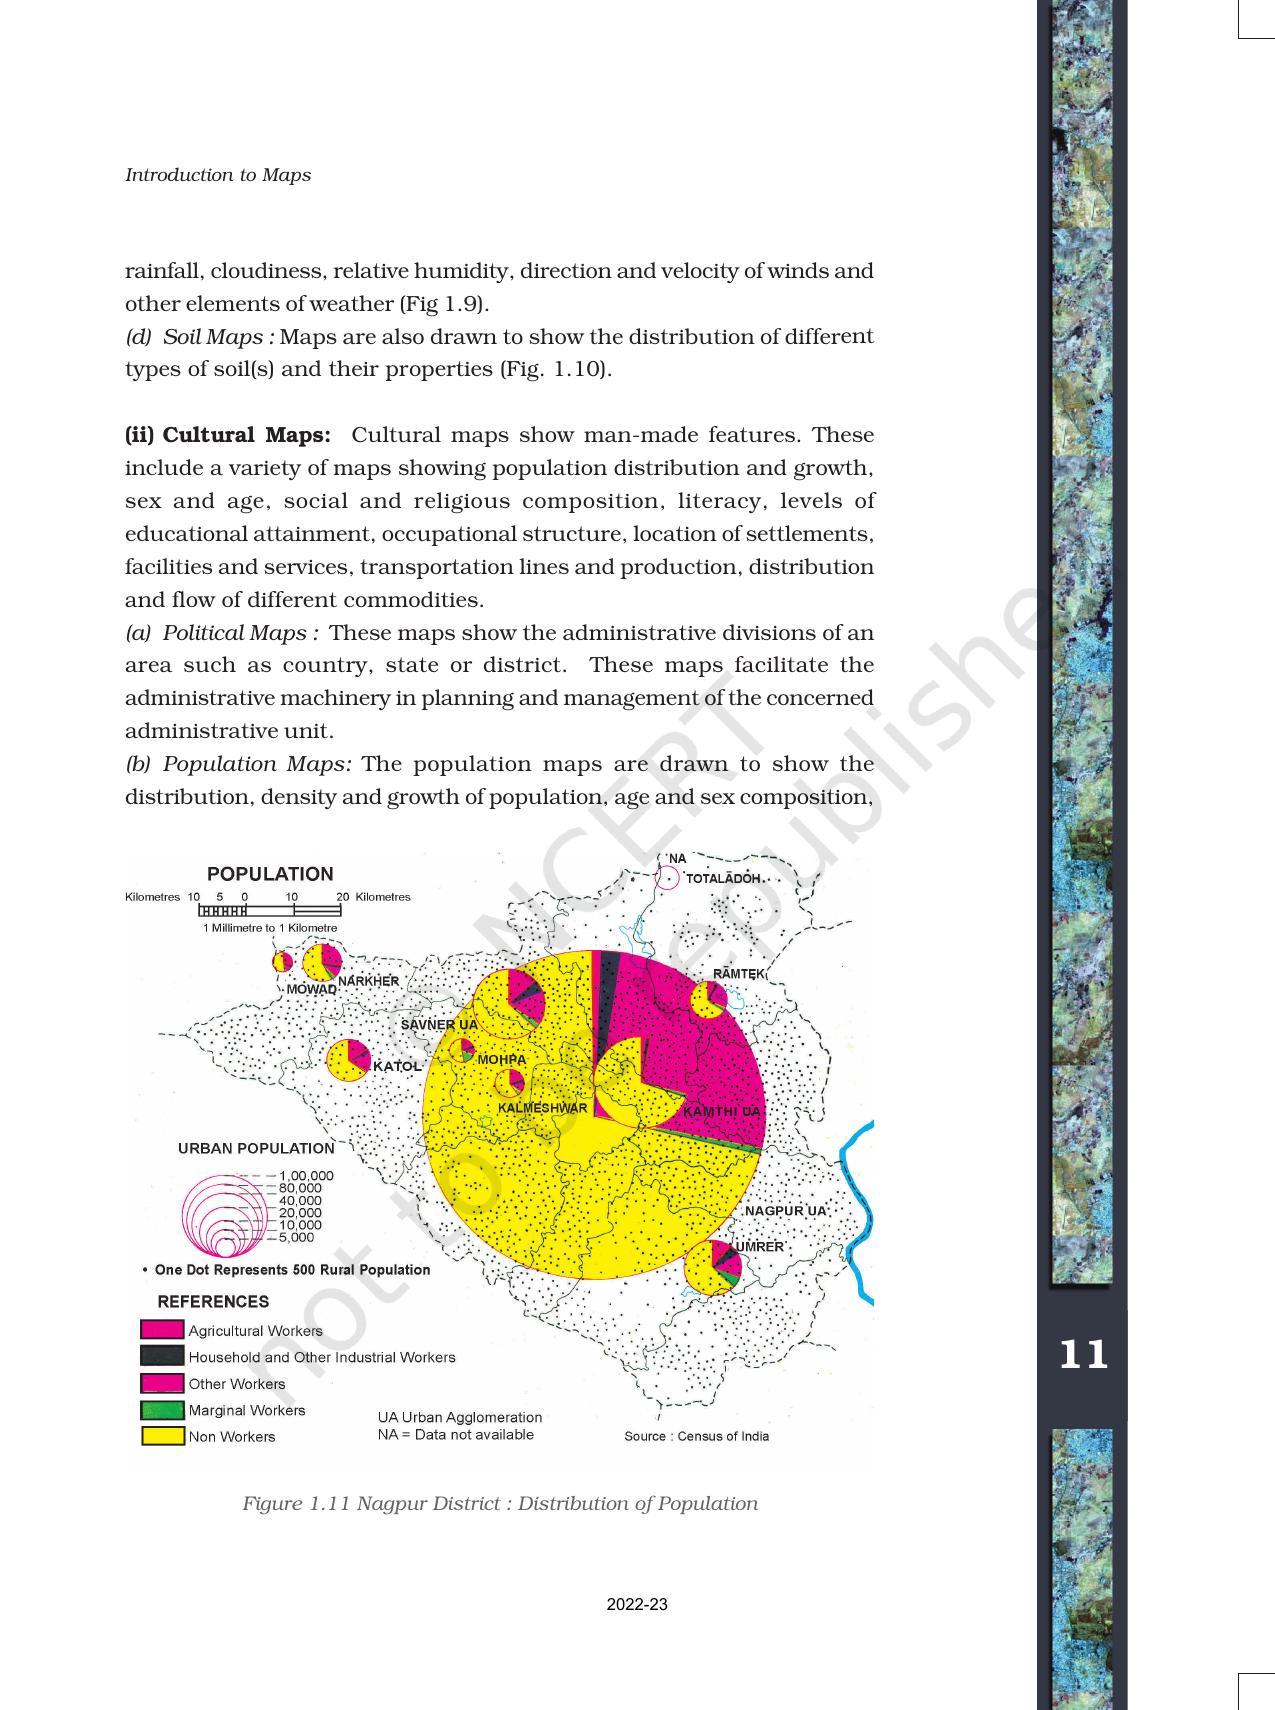 NCERT Book for Class 11 Geography (Part-III) Chapter 1 Introduction to Maps - Page 11